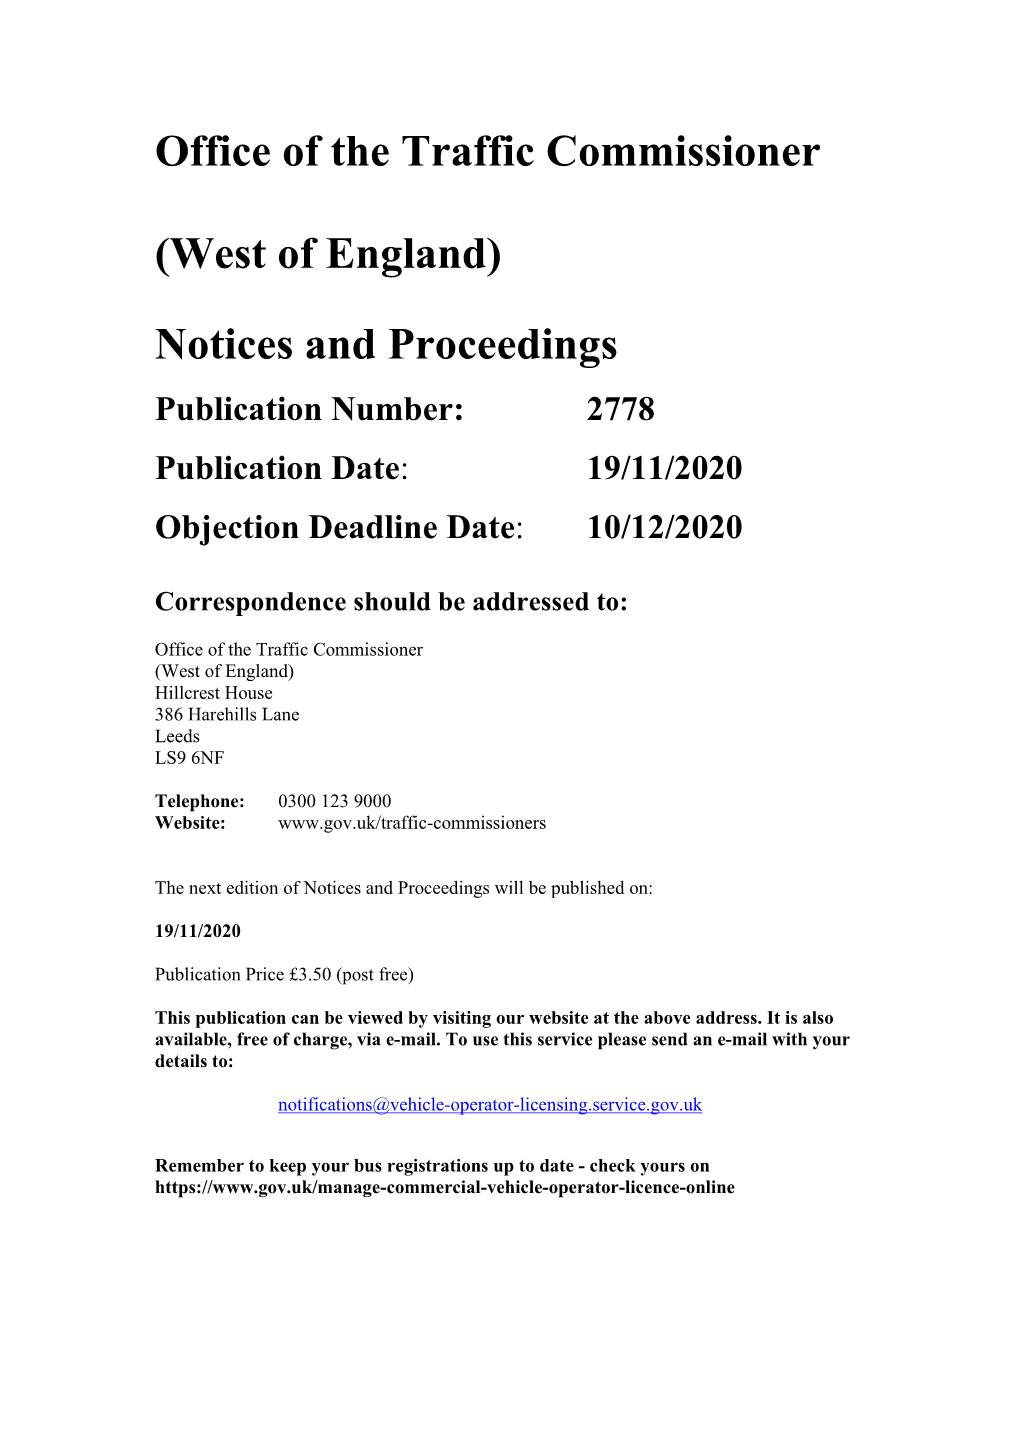 Notices and Proceedings for the West of England 2778